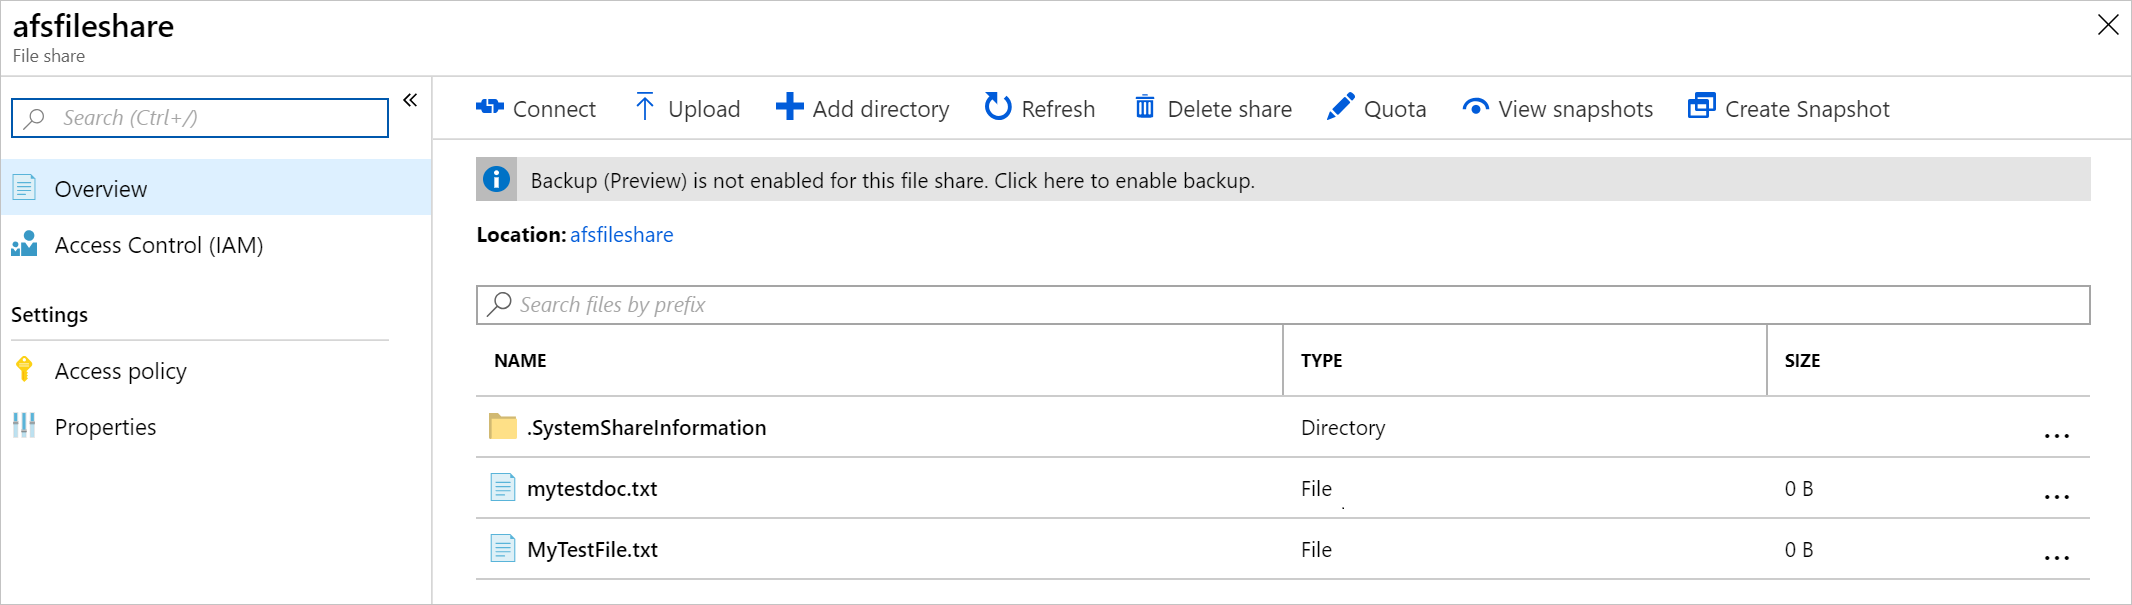 Screenshot showing files successfully synced with an Azure file share.